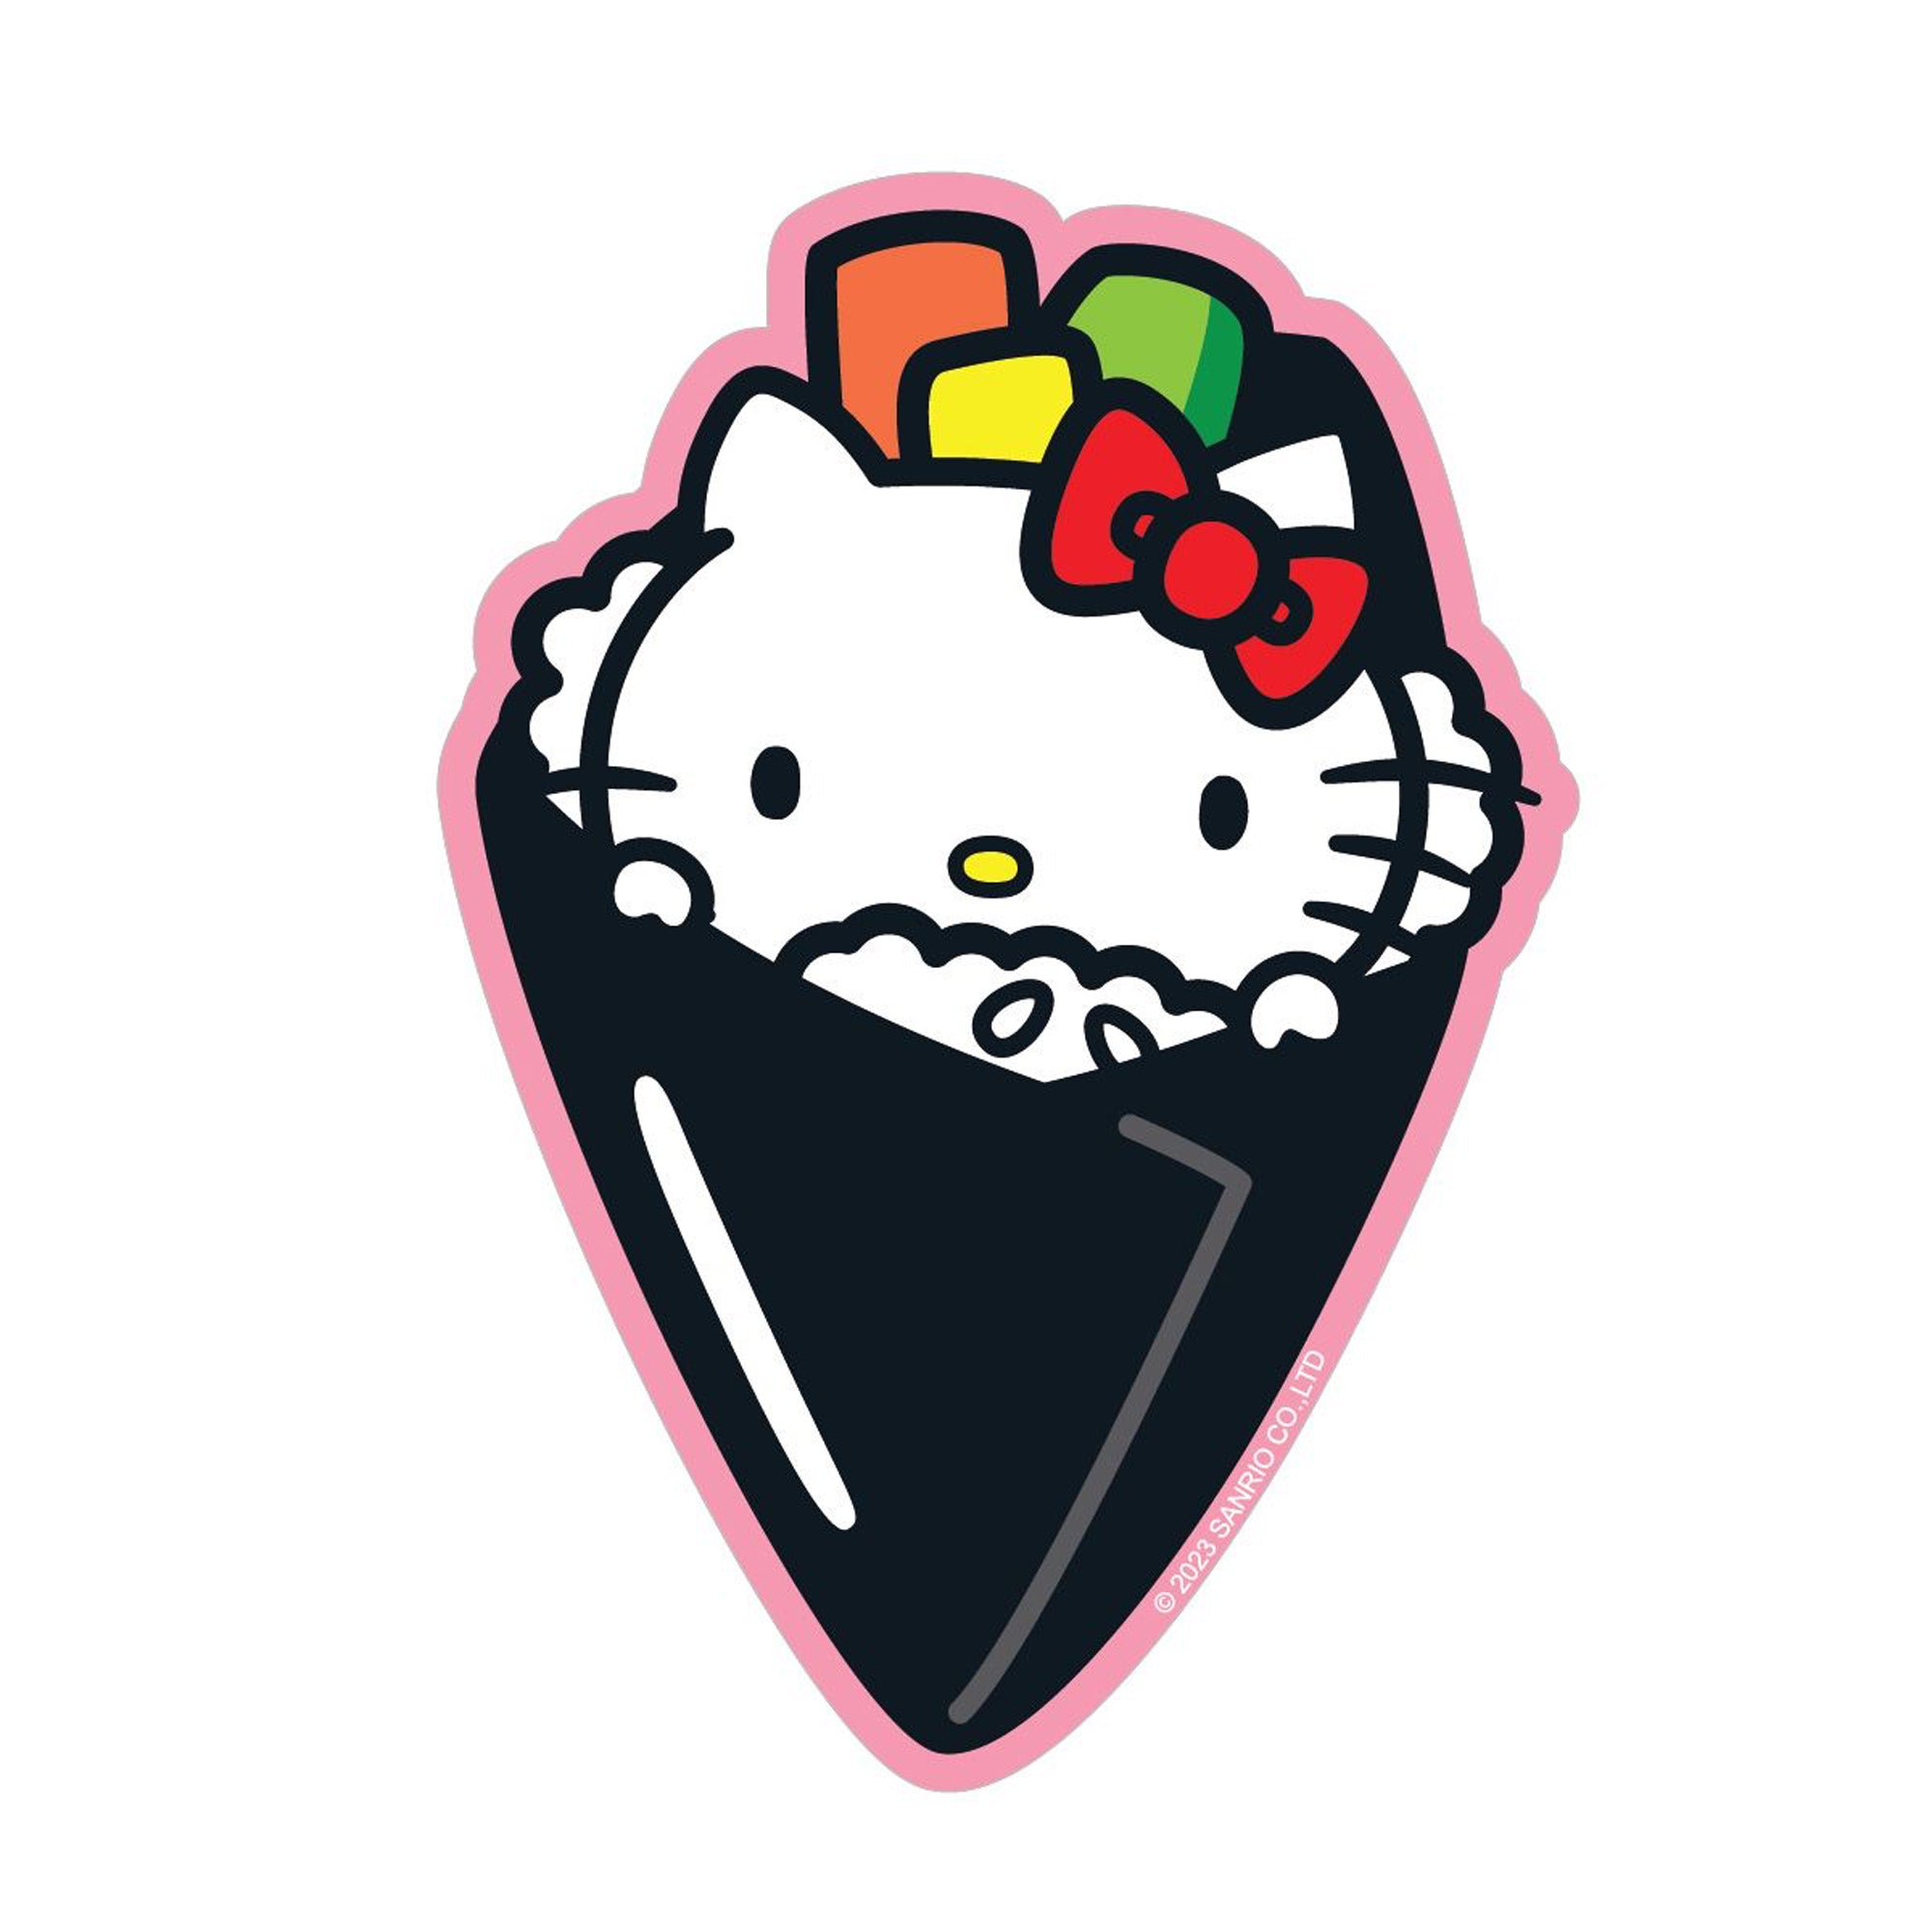 Hello Kitty Pop Ups Offer Sweet Treats and Unique Exclusives